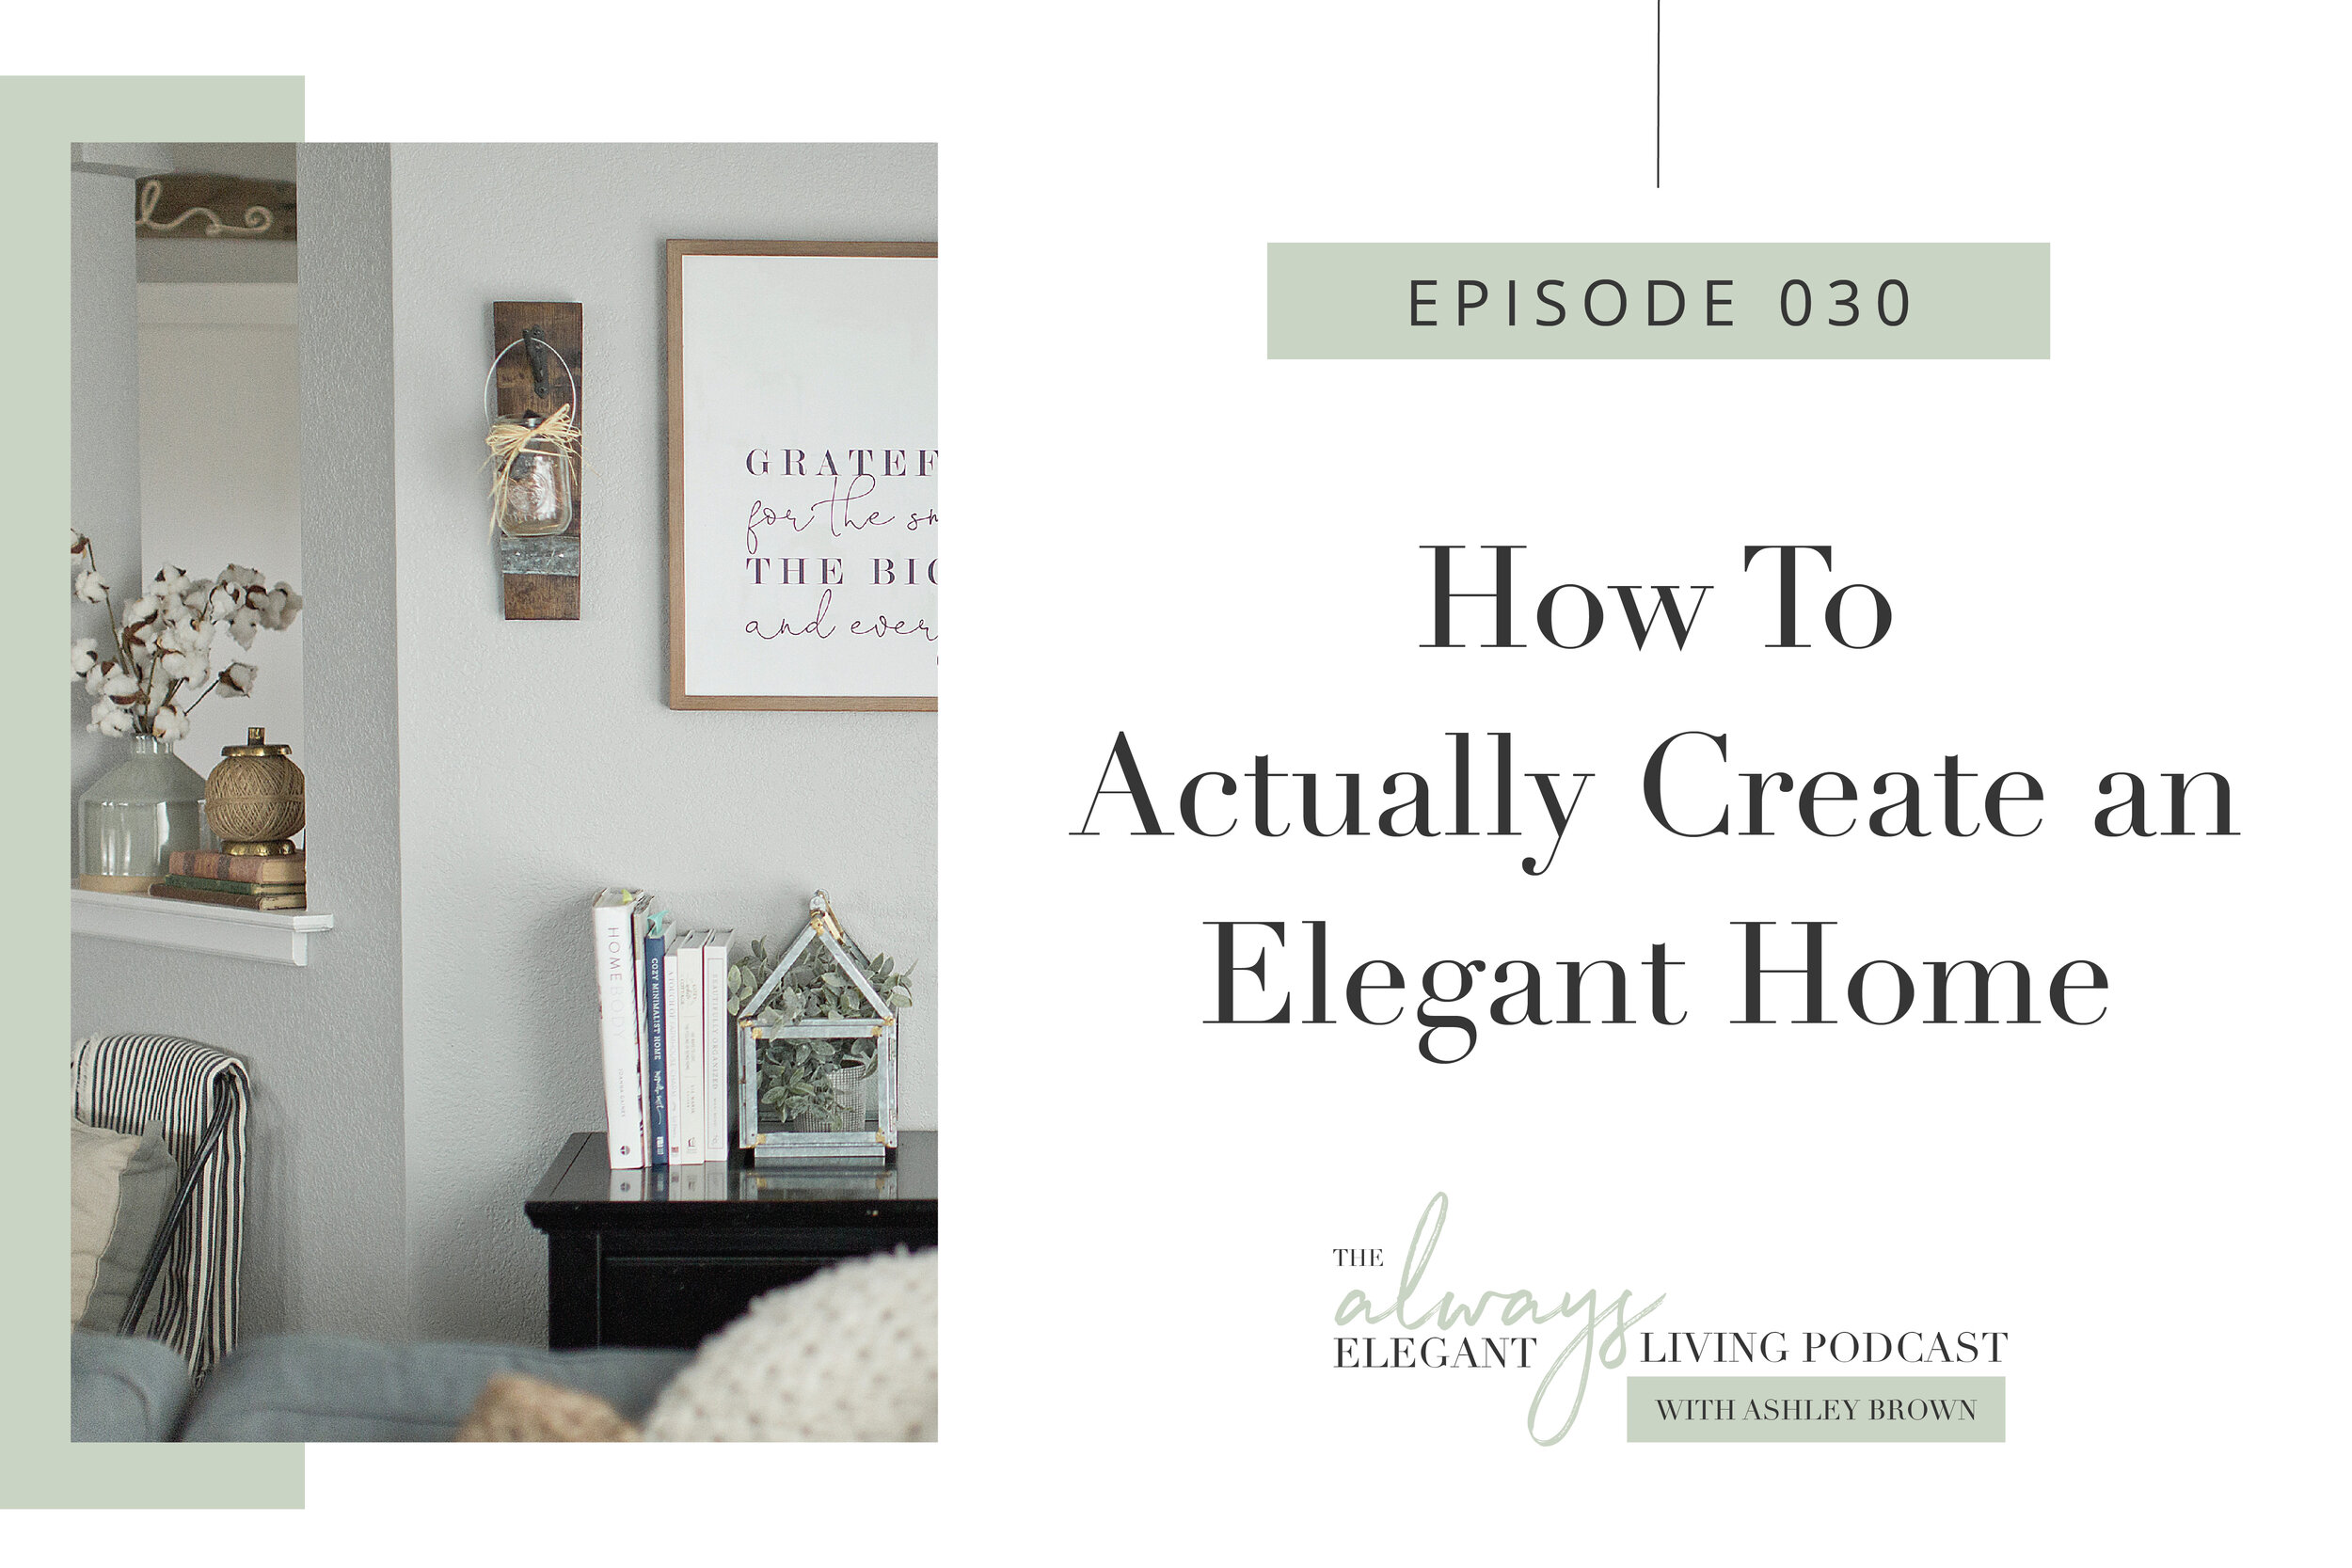 How To Actually Create an Elegant Home — Always Elegant Living